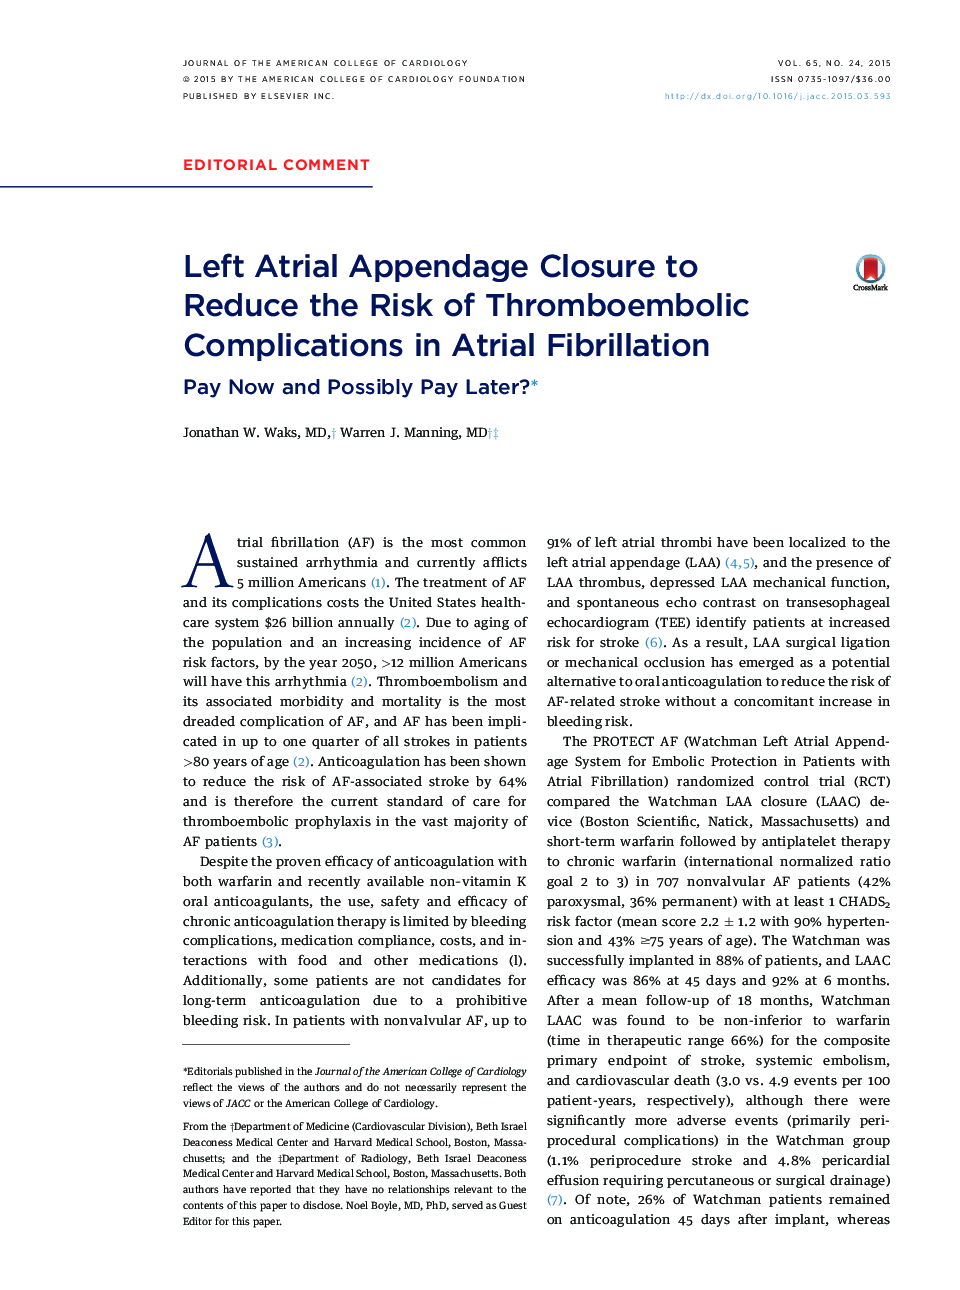 Left Atrial Appendage Closure to Reduce the Risk of Thromboembolic Complications in Atrial Fibrillation